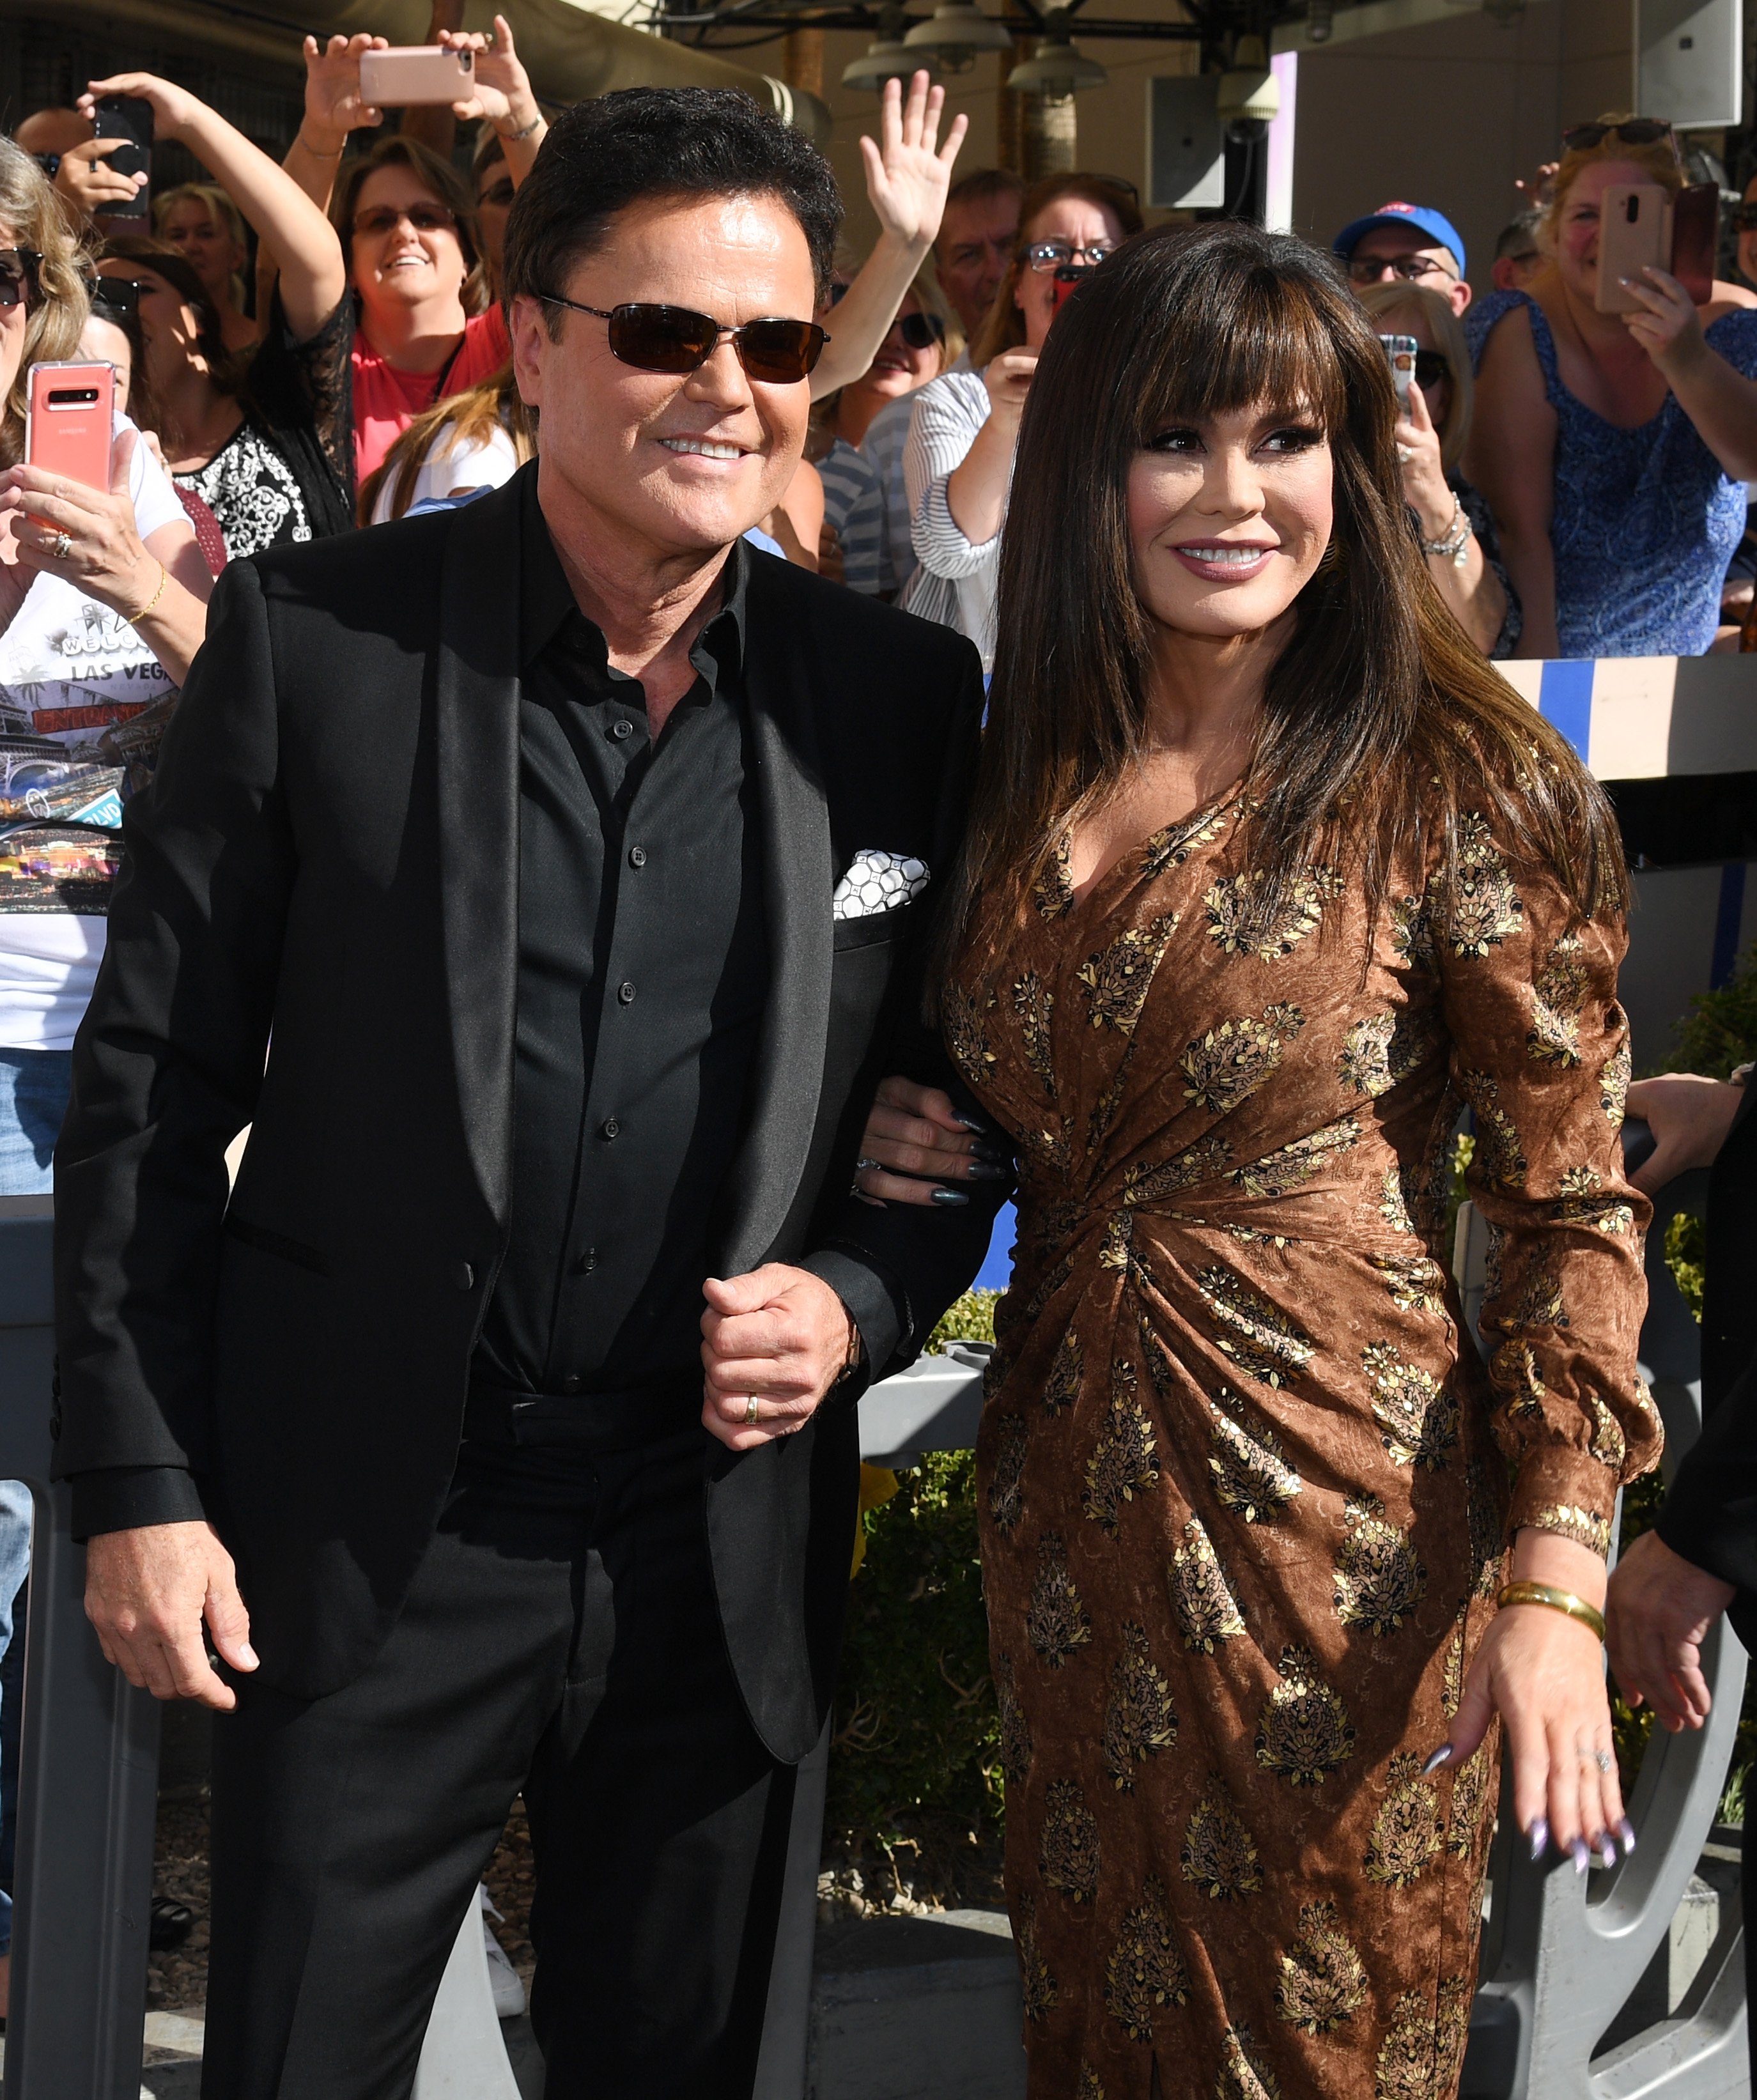 Donny Osmond and Marie Osmond at the unveiling of their star from the Las Vegas Walk of Stars outside Flamingo Las Vegas on October 4, 2019 | Source: Getty Images